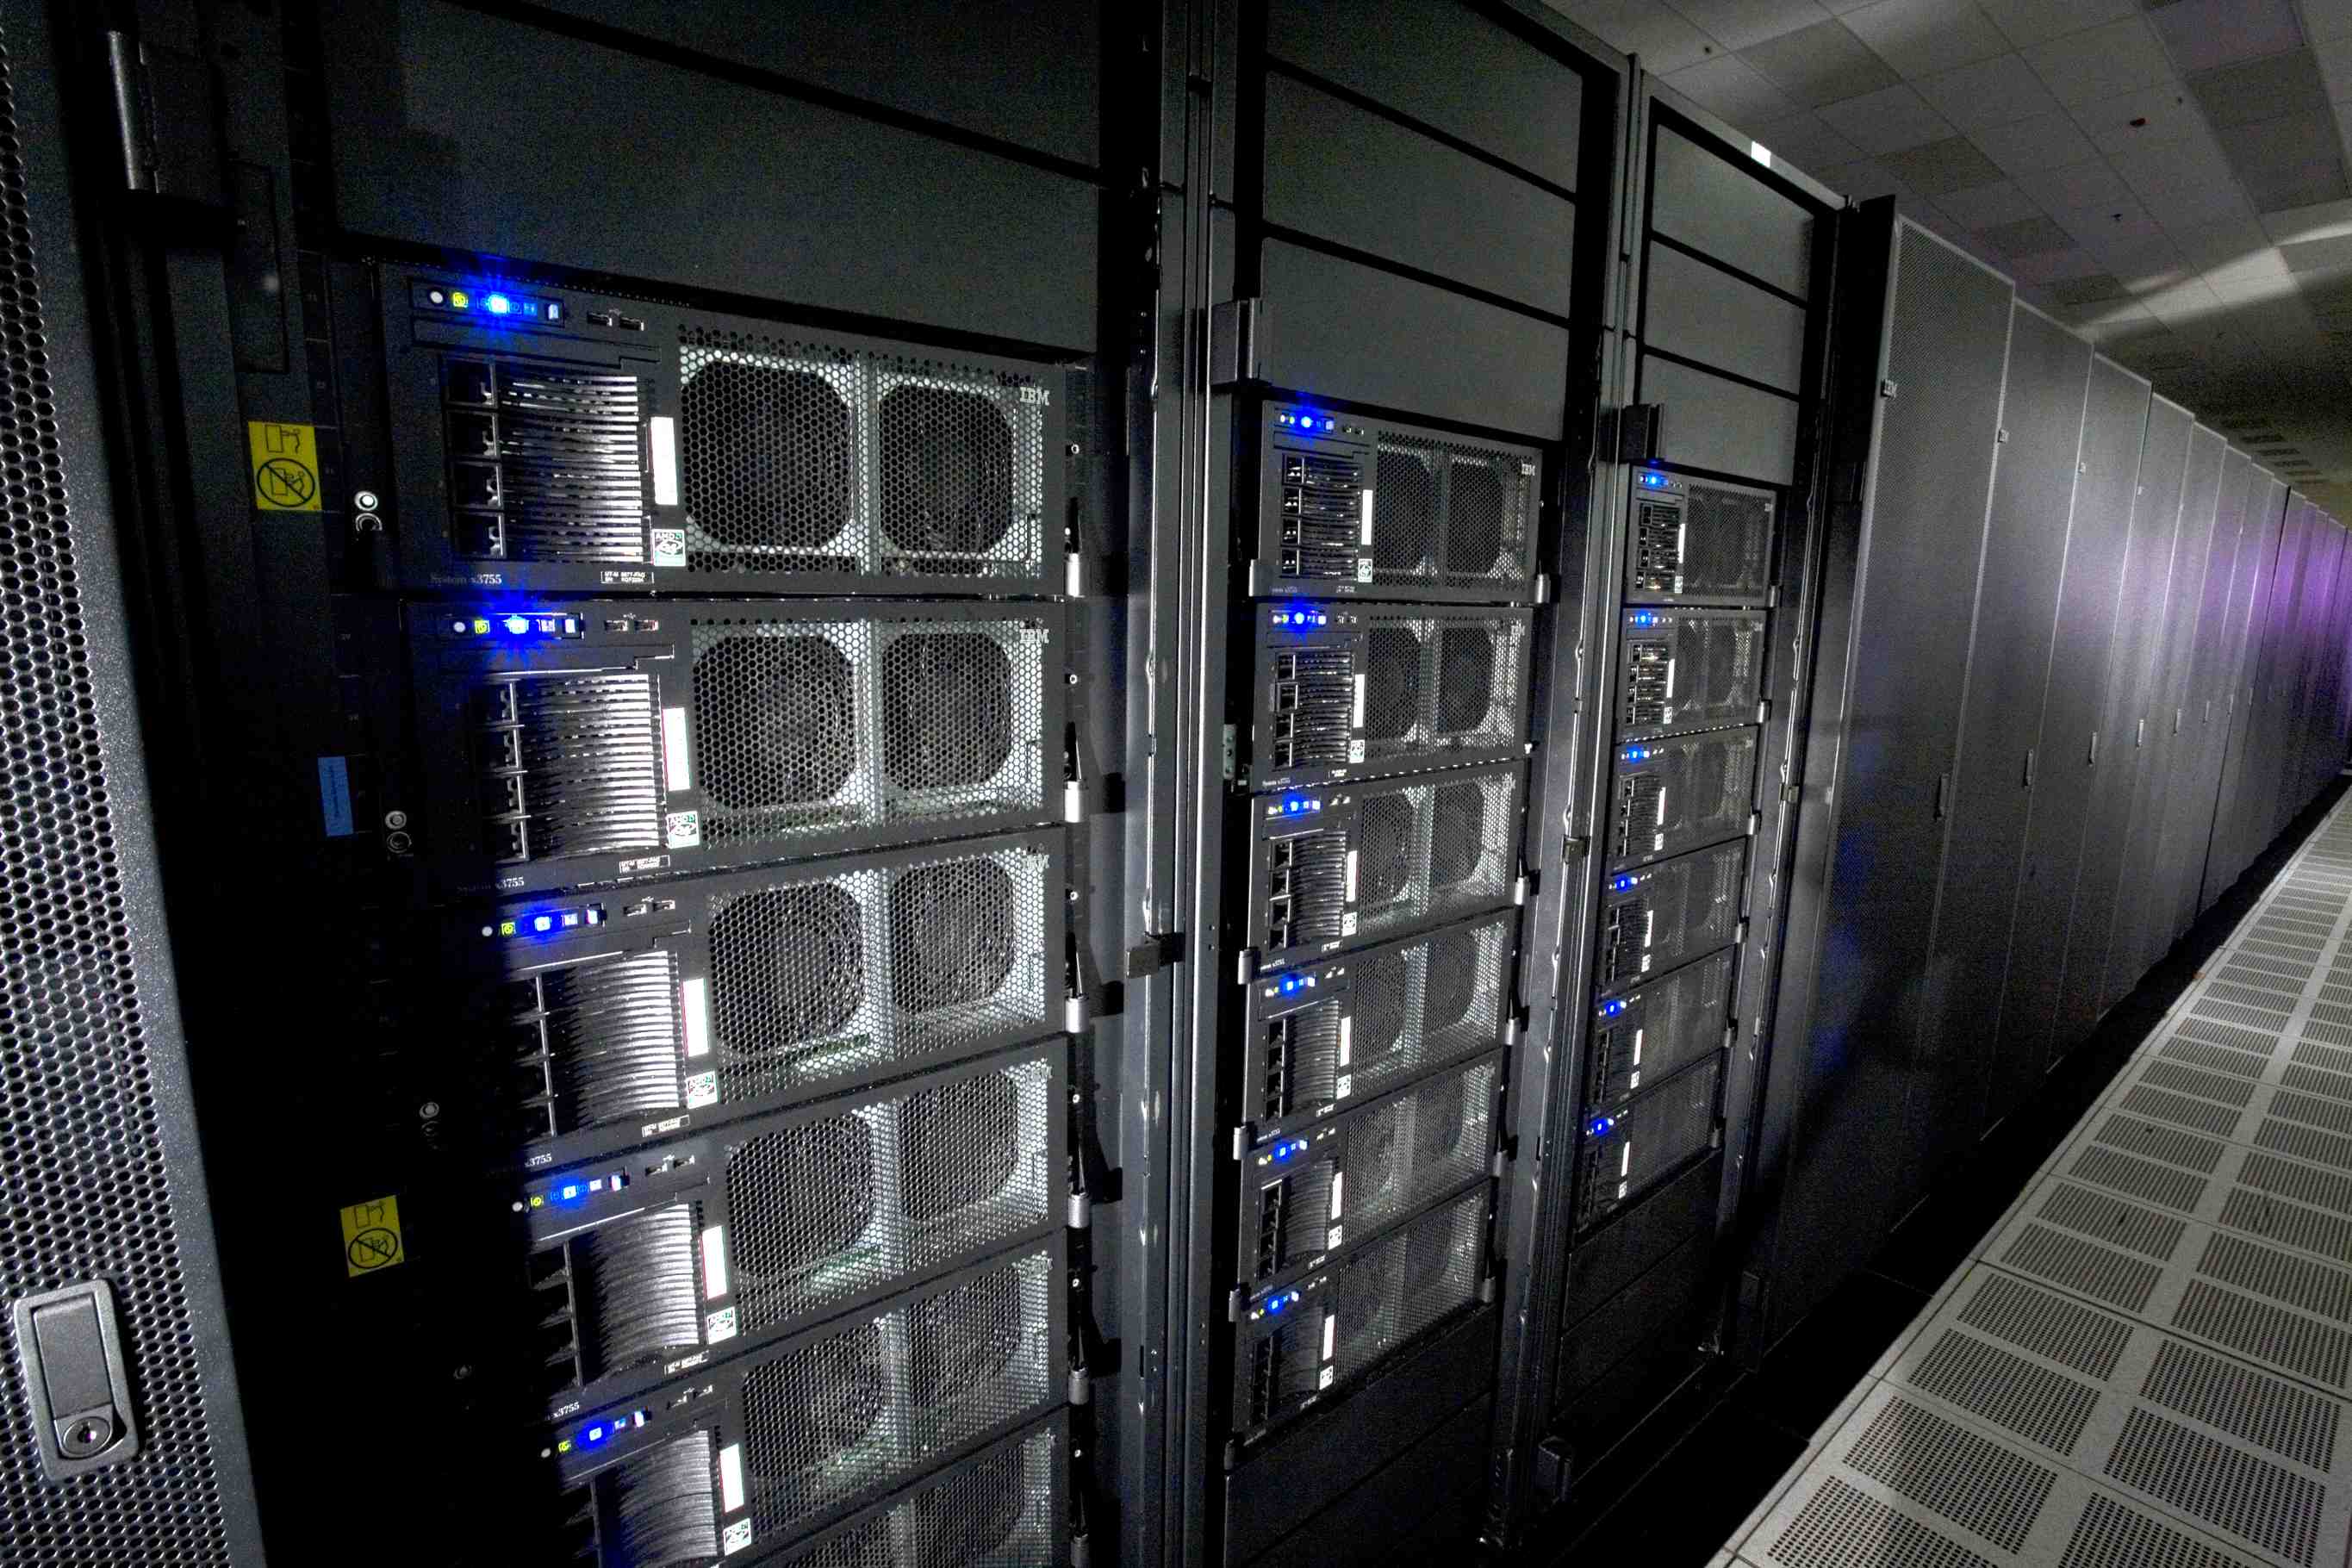 The Roadrunner Supercomputer at Los Alamos National Lab. Unless otherwise indicated, this information has been authored by an employee or employees of the Los Alamos National Security, LLC (LANS), operator of the Los Alamos National Laboratory under Contract No.DE-AC52-06NA253 with the U.S. Department of Energy